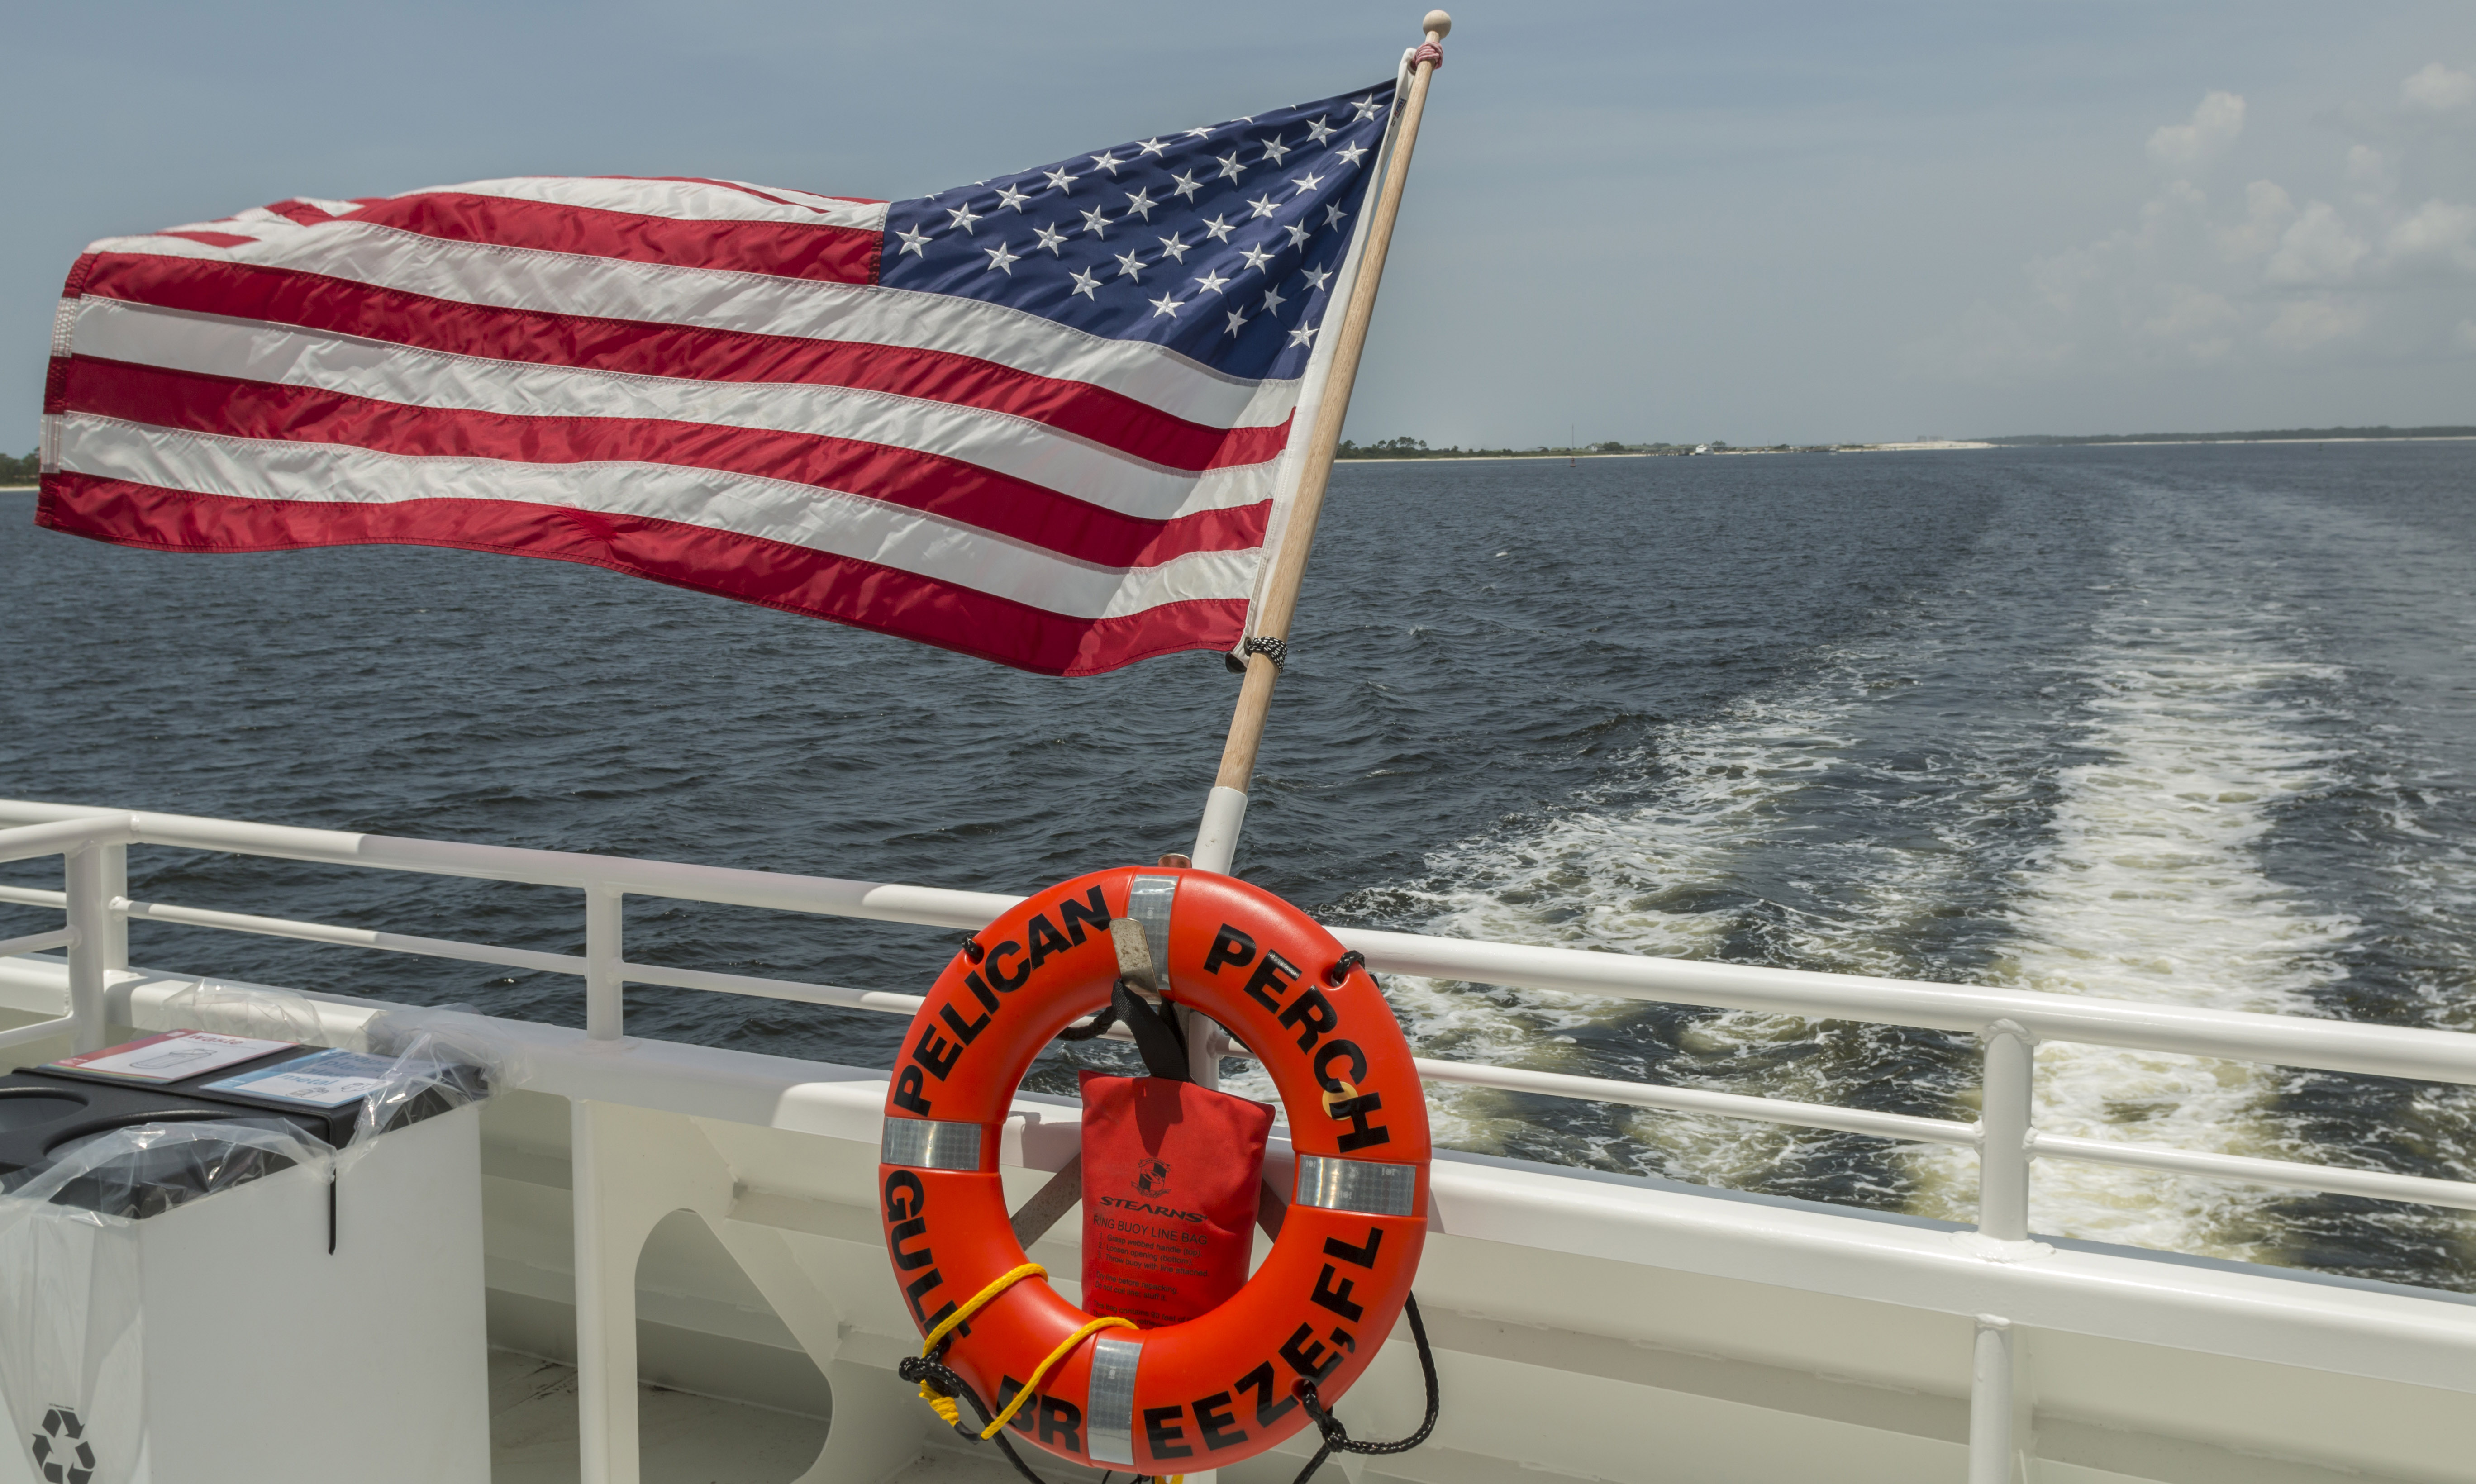 An american flag flys from the back of a tour boat.